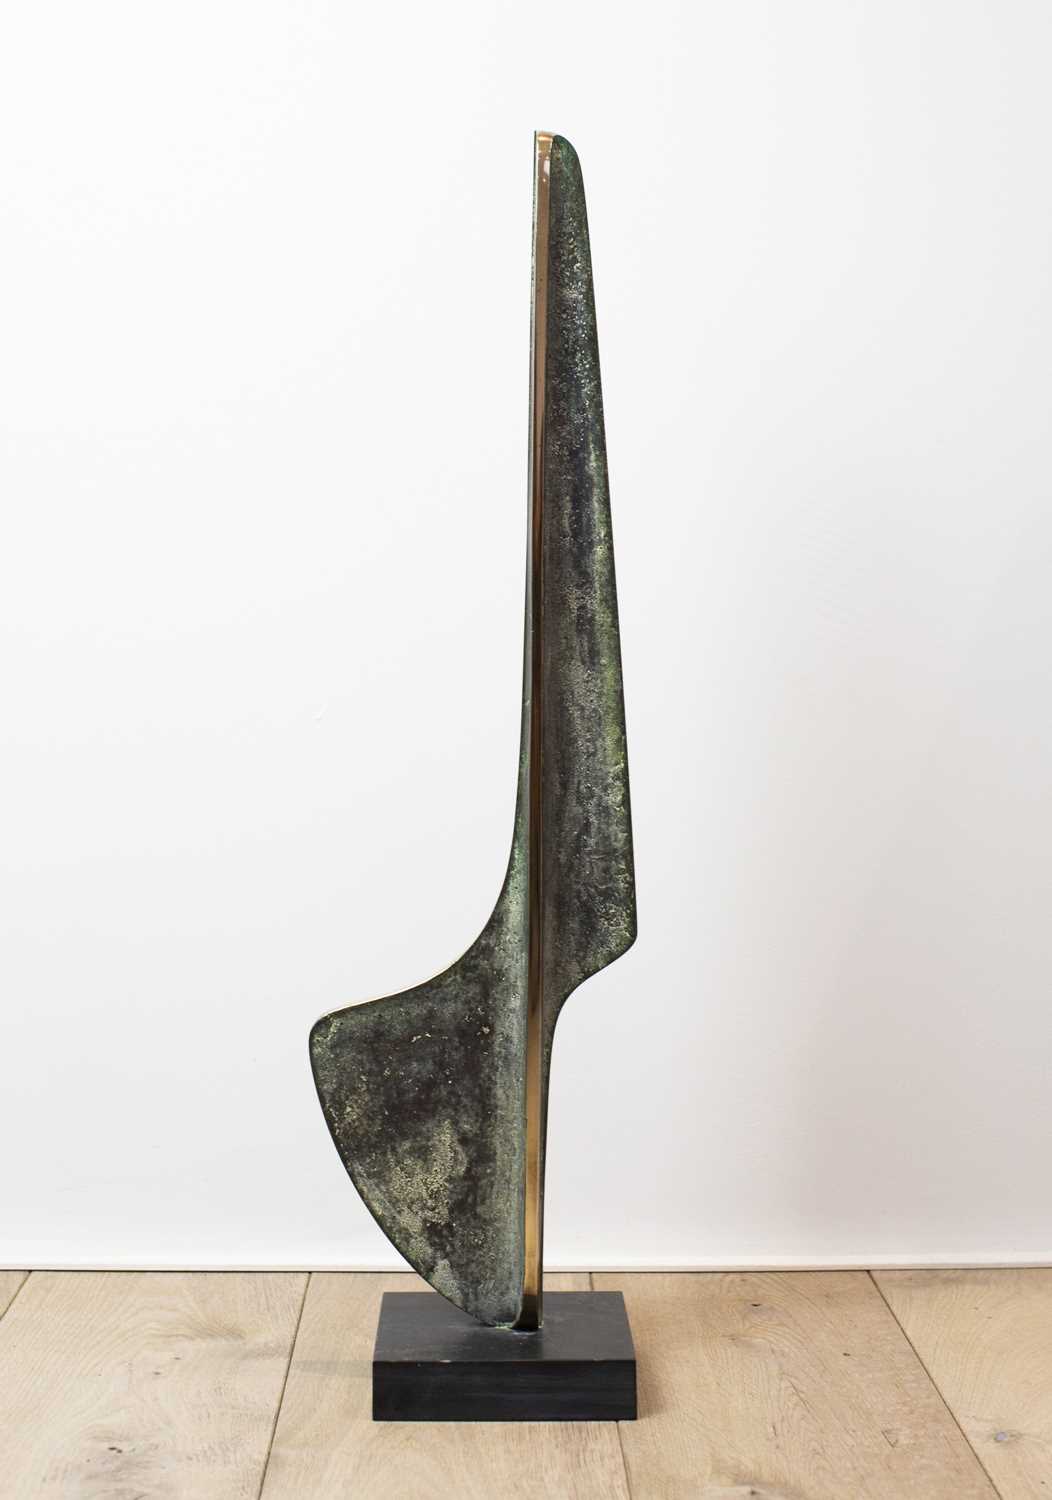 Denis MITCHELL (1912-1993) Crowan Polished and patinated bronze Titled, dated '81, numbered 5/7 - Image 3 of 6